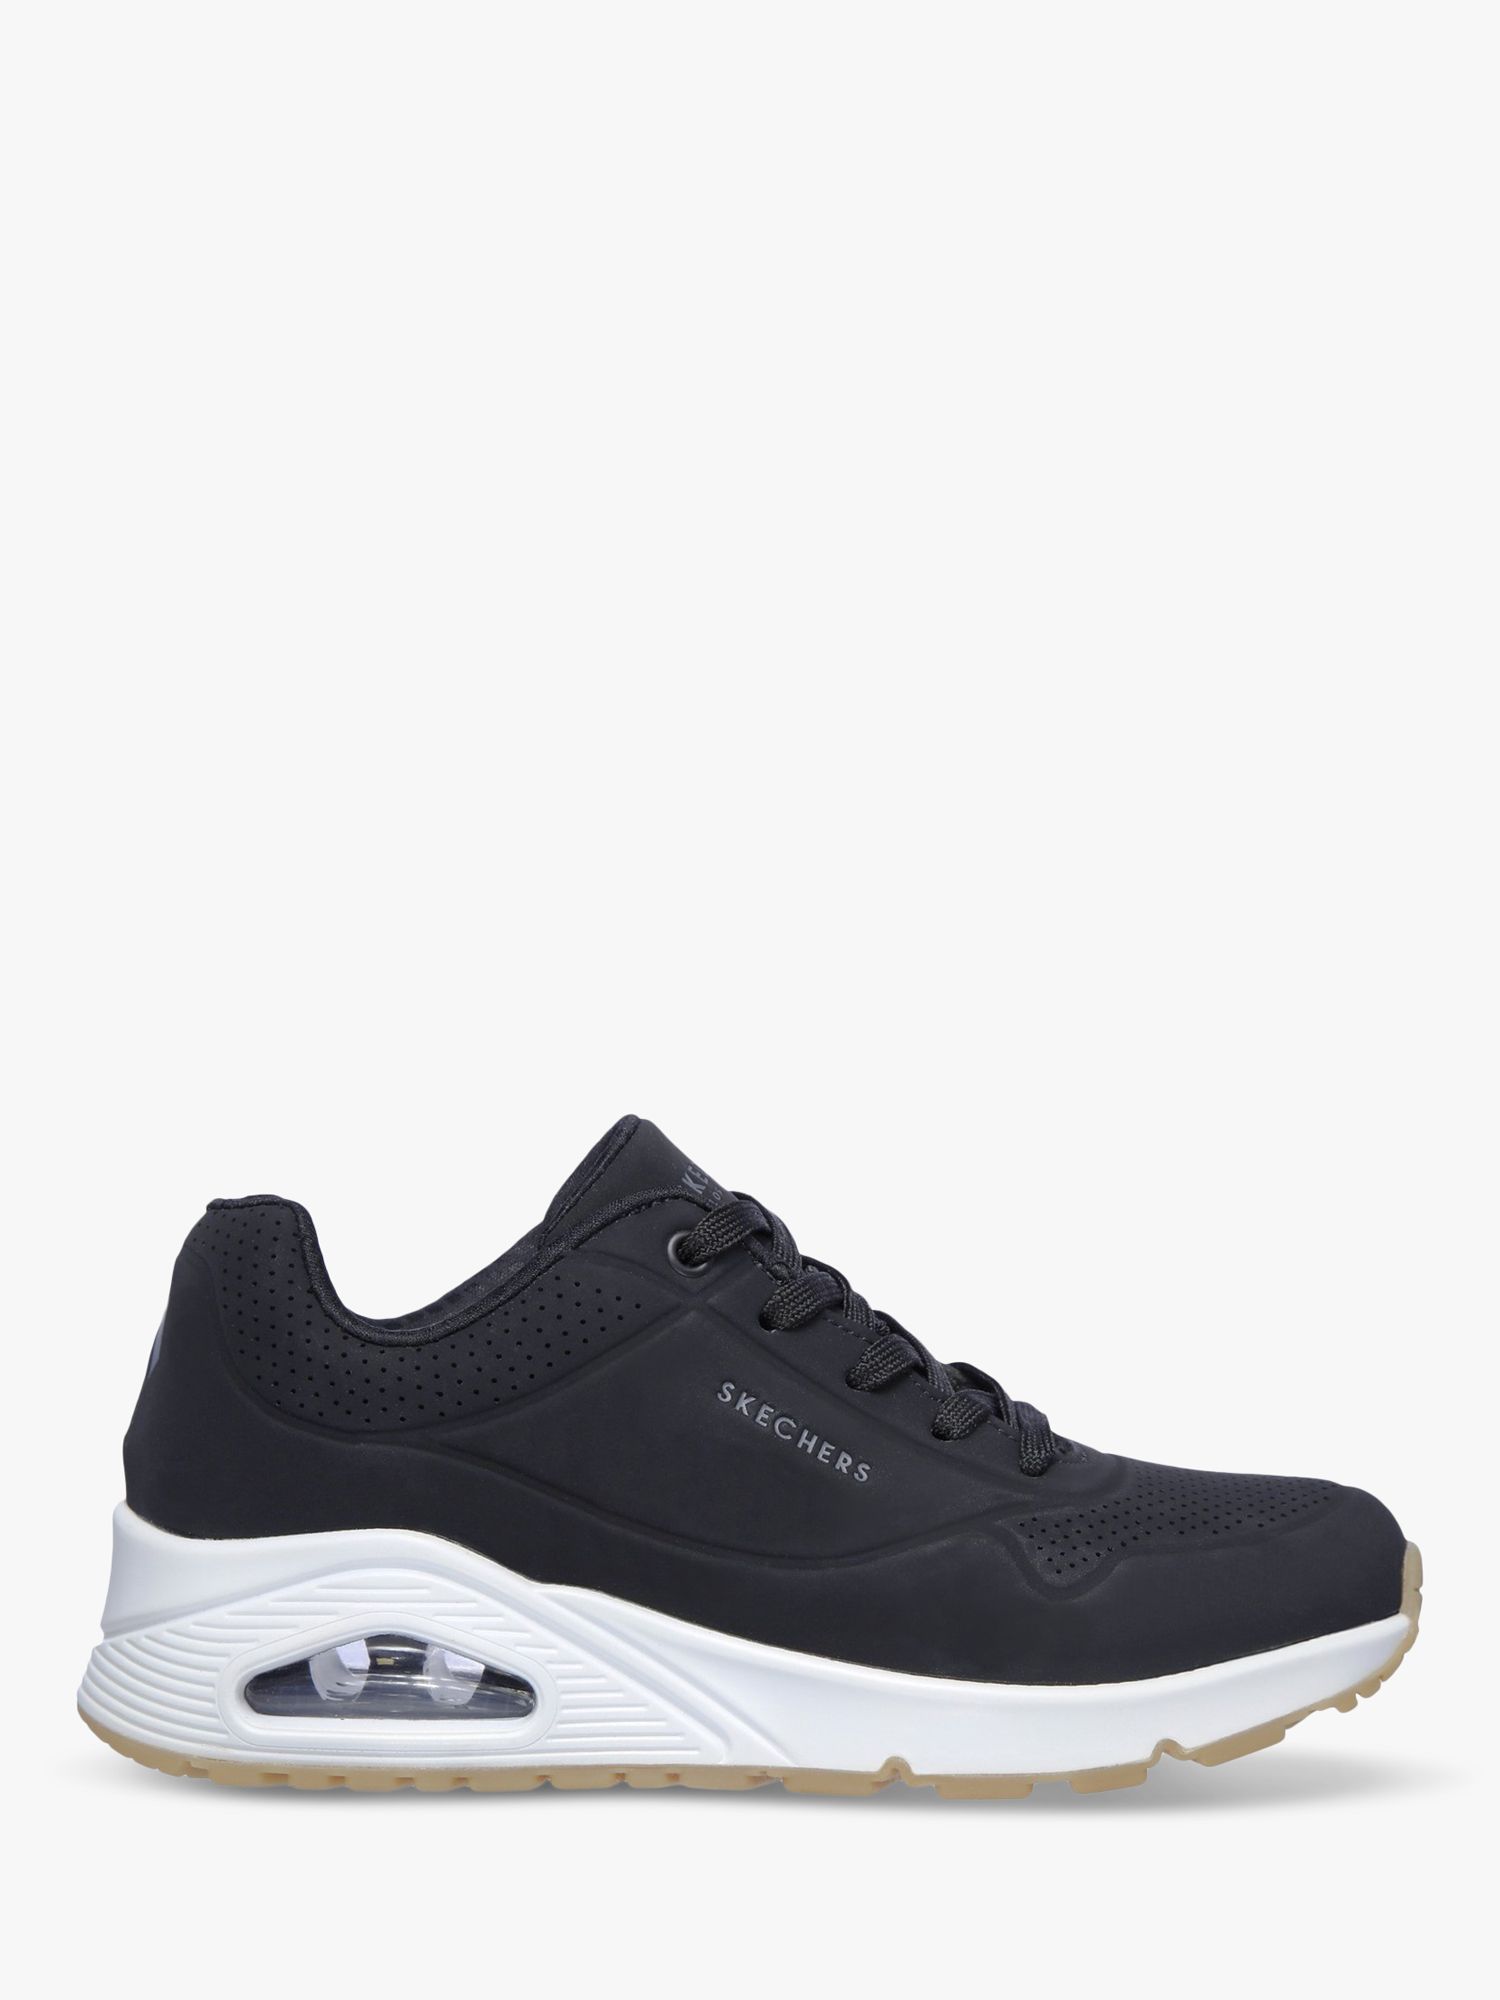 Konsulat modtagende hat Skechers Uno Stand On Air Sports Trainers, Black at John Lewis & Partners